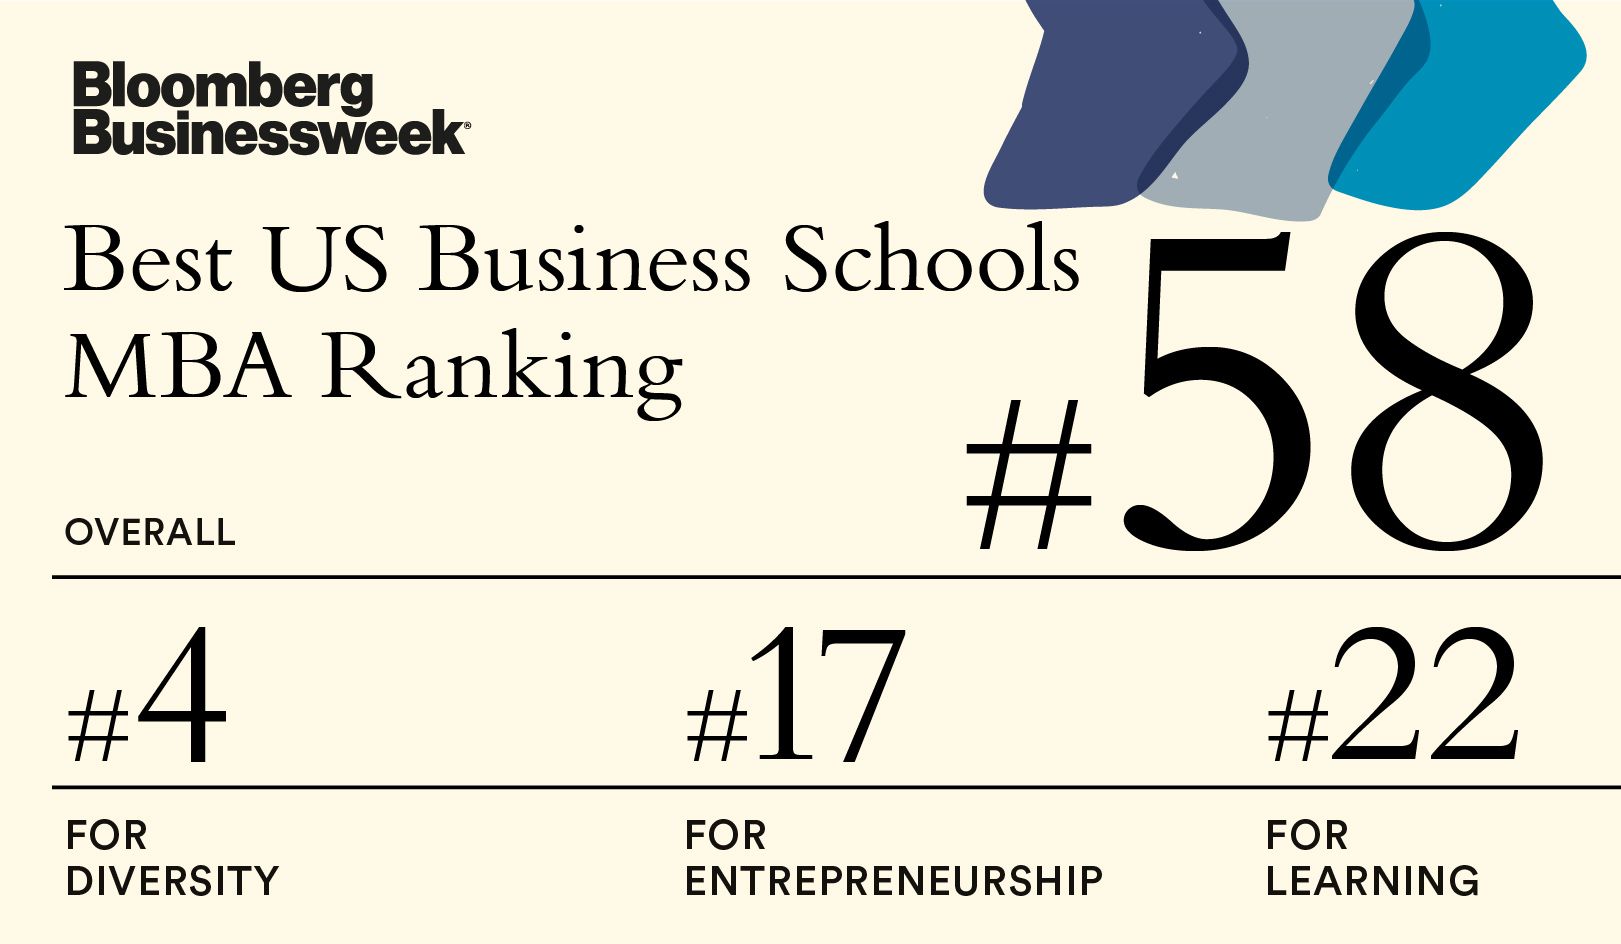 phd business administration ranking